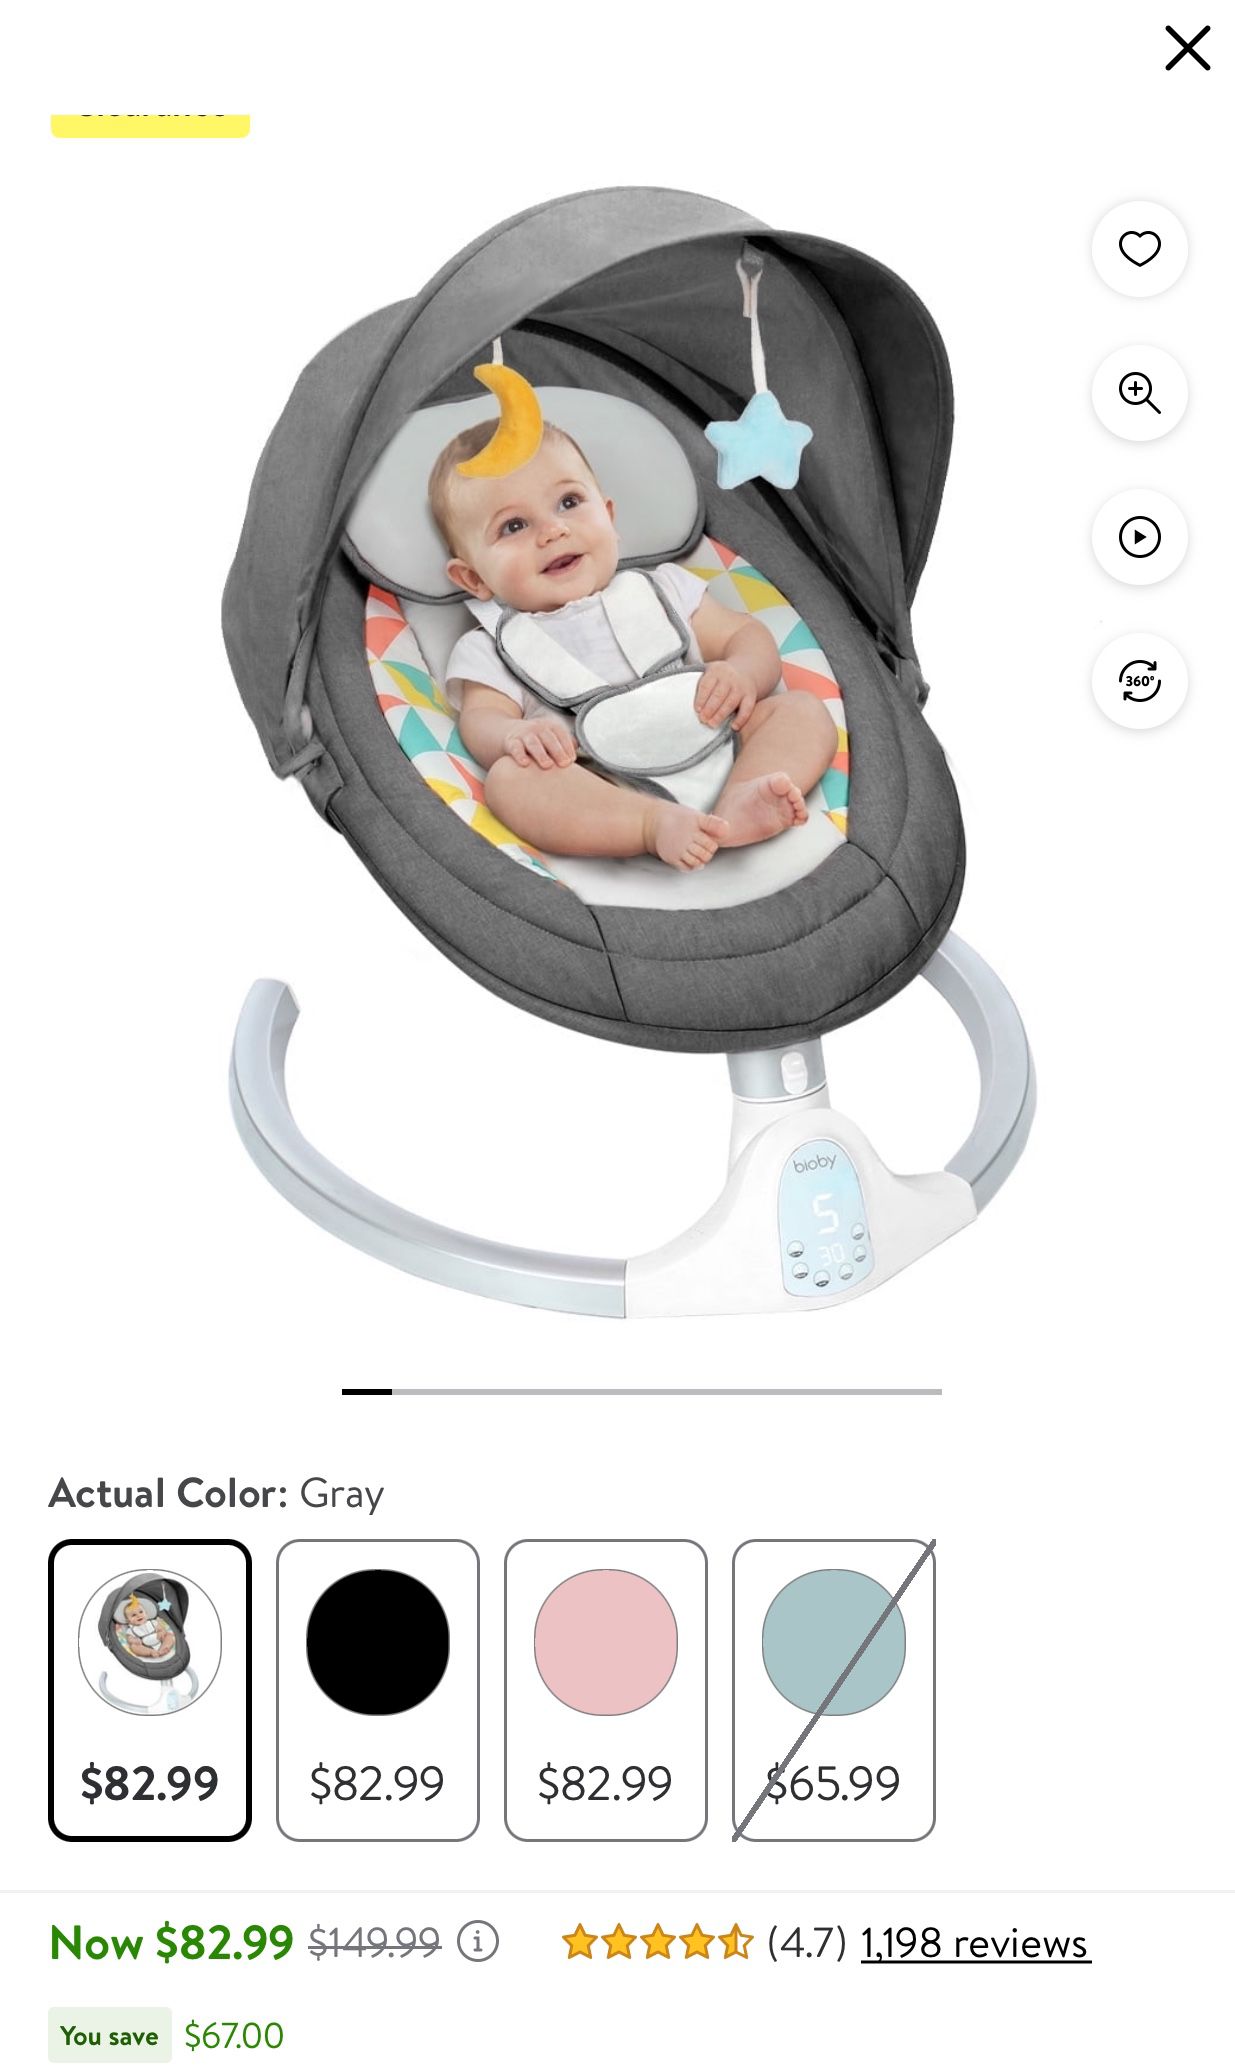 Baby Swing for Infants, Electric Bluetooth Baby Rocker, 5 Sway Speeds, Touch Screen Remote Control, Gray